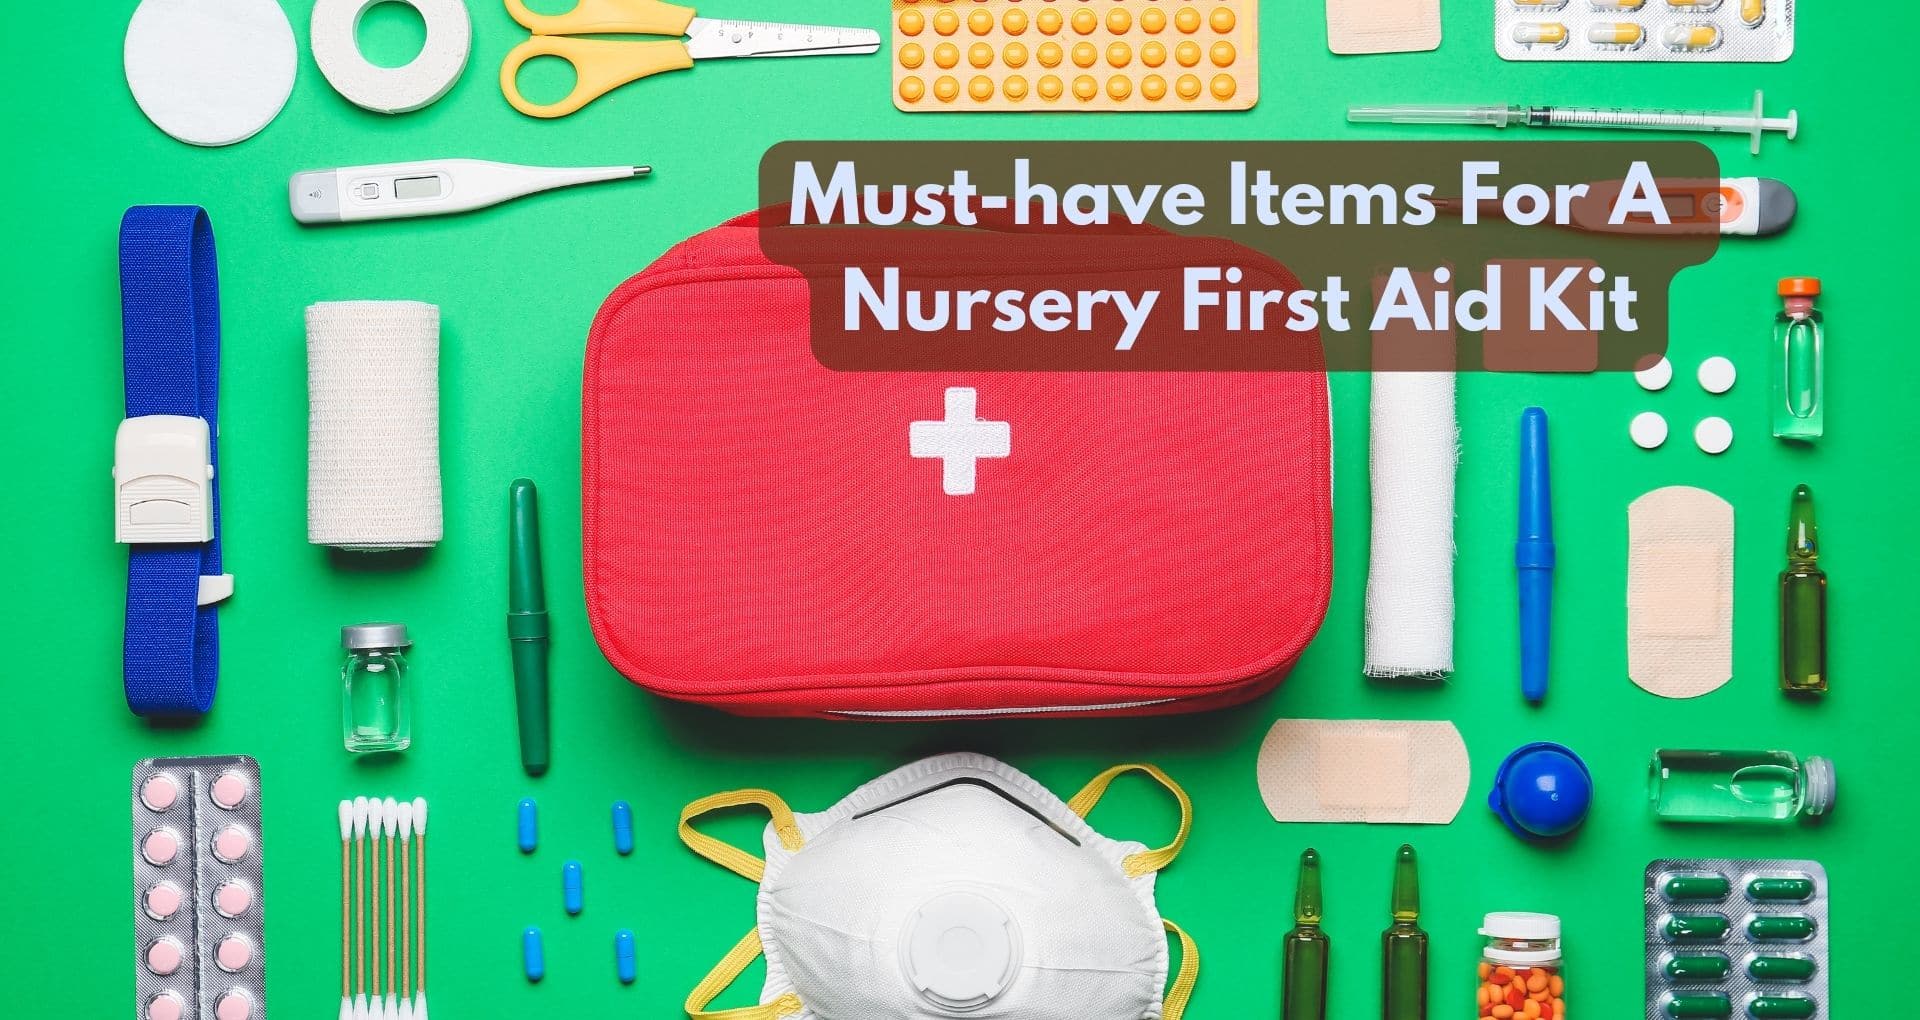 What Are The Must-have Items For A Nursery First Aid Kit?